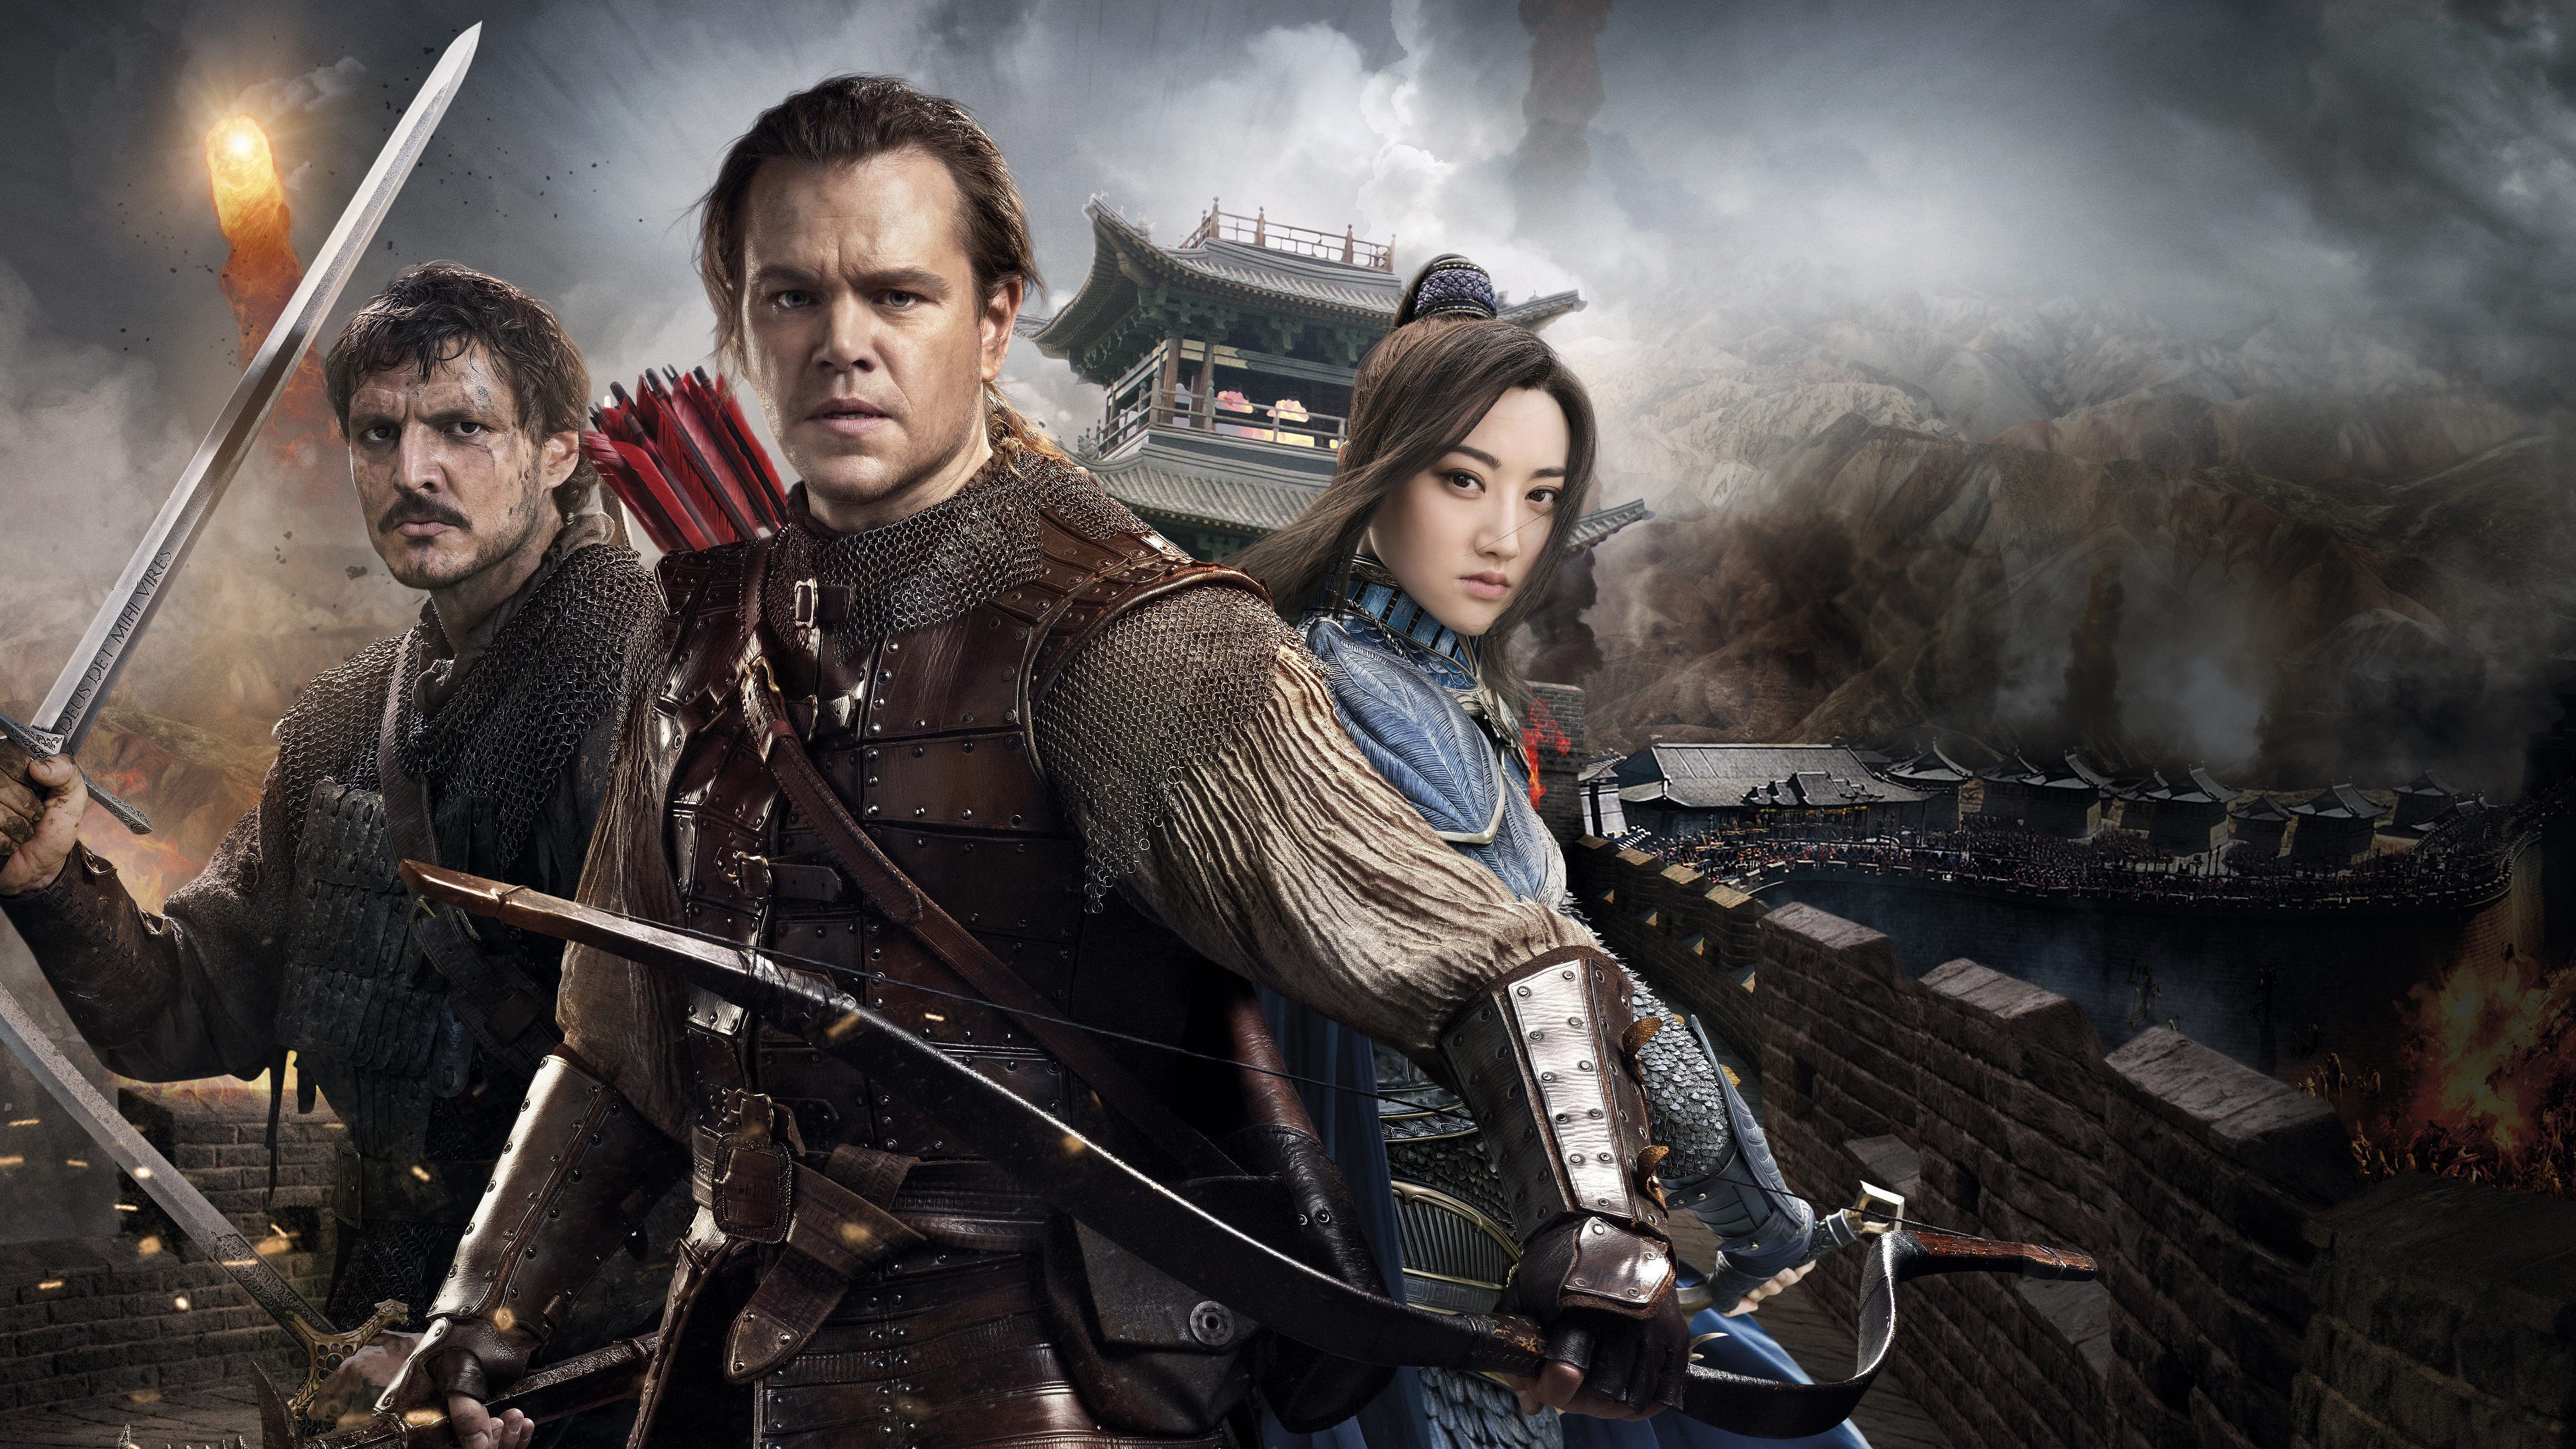 watch the great wall movie free